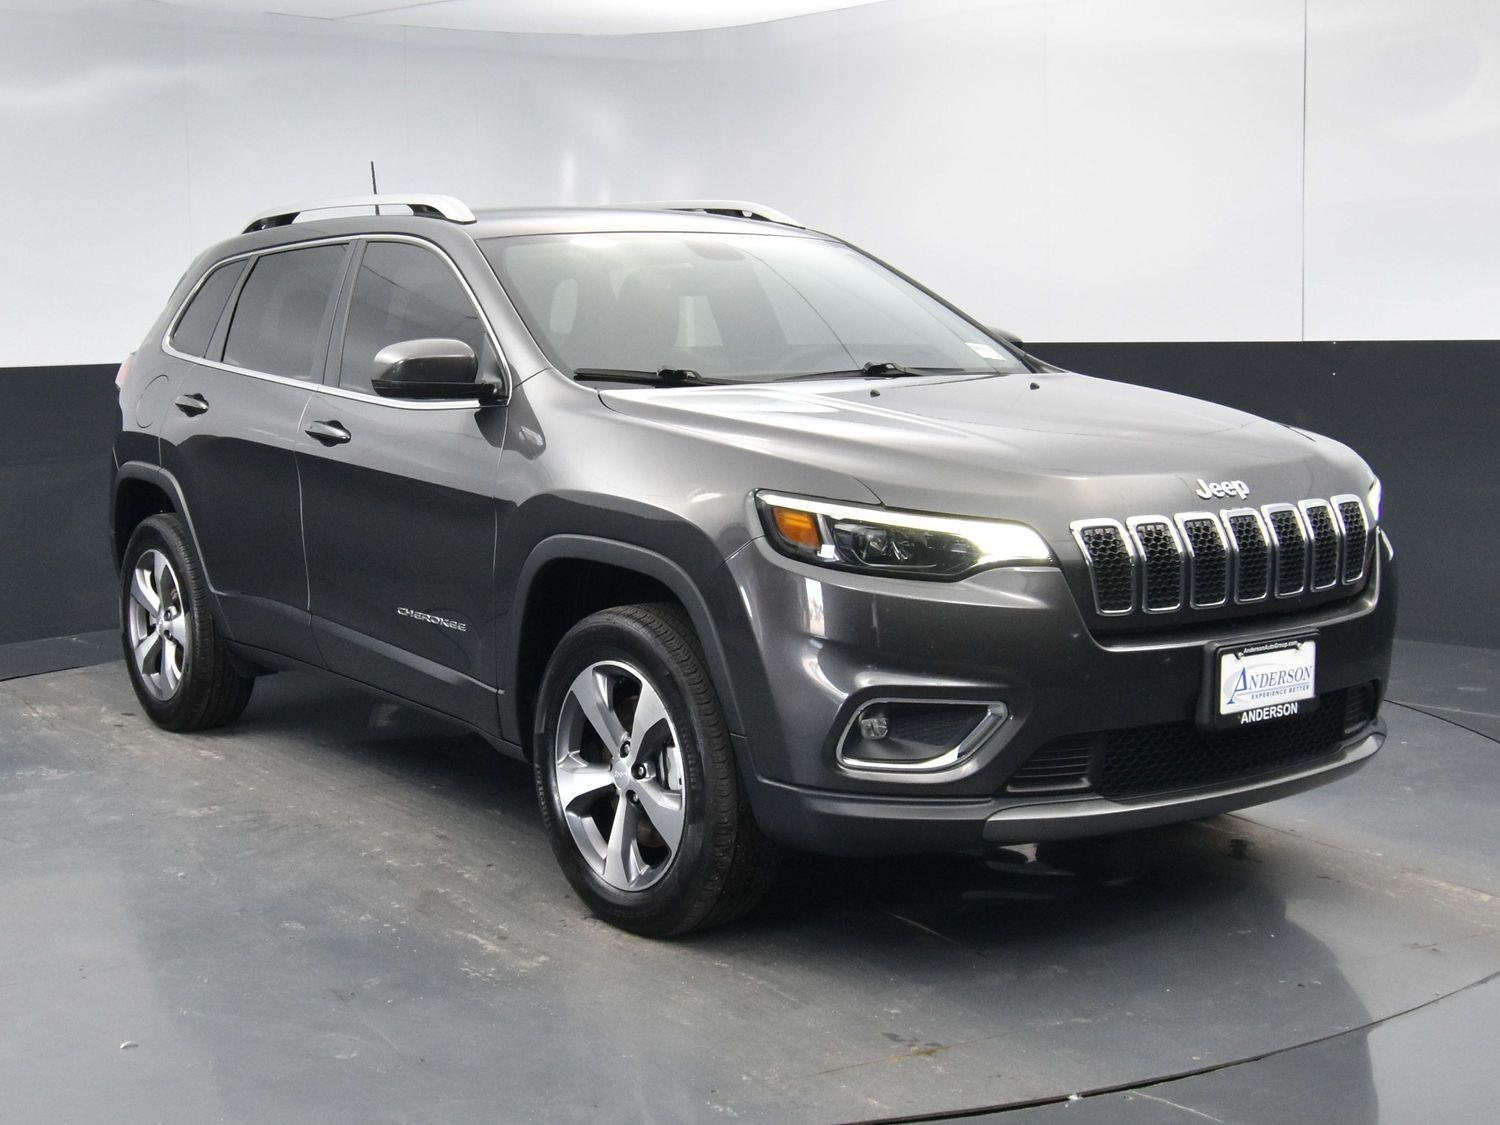 Used 2020 Jeep Cherokee Limited SUV for sale in Grand Island NE